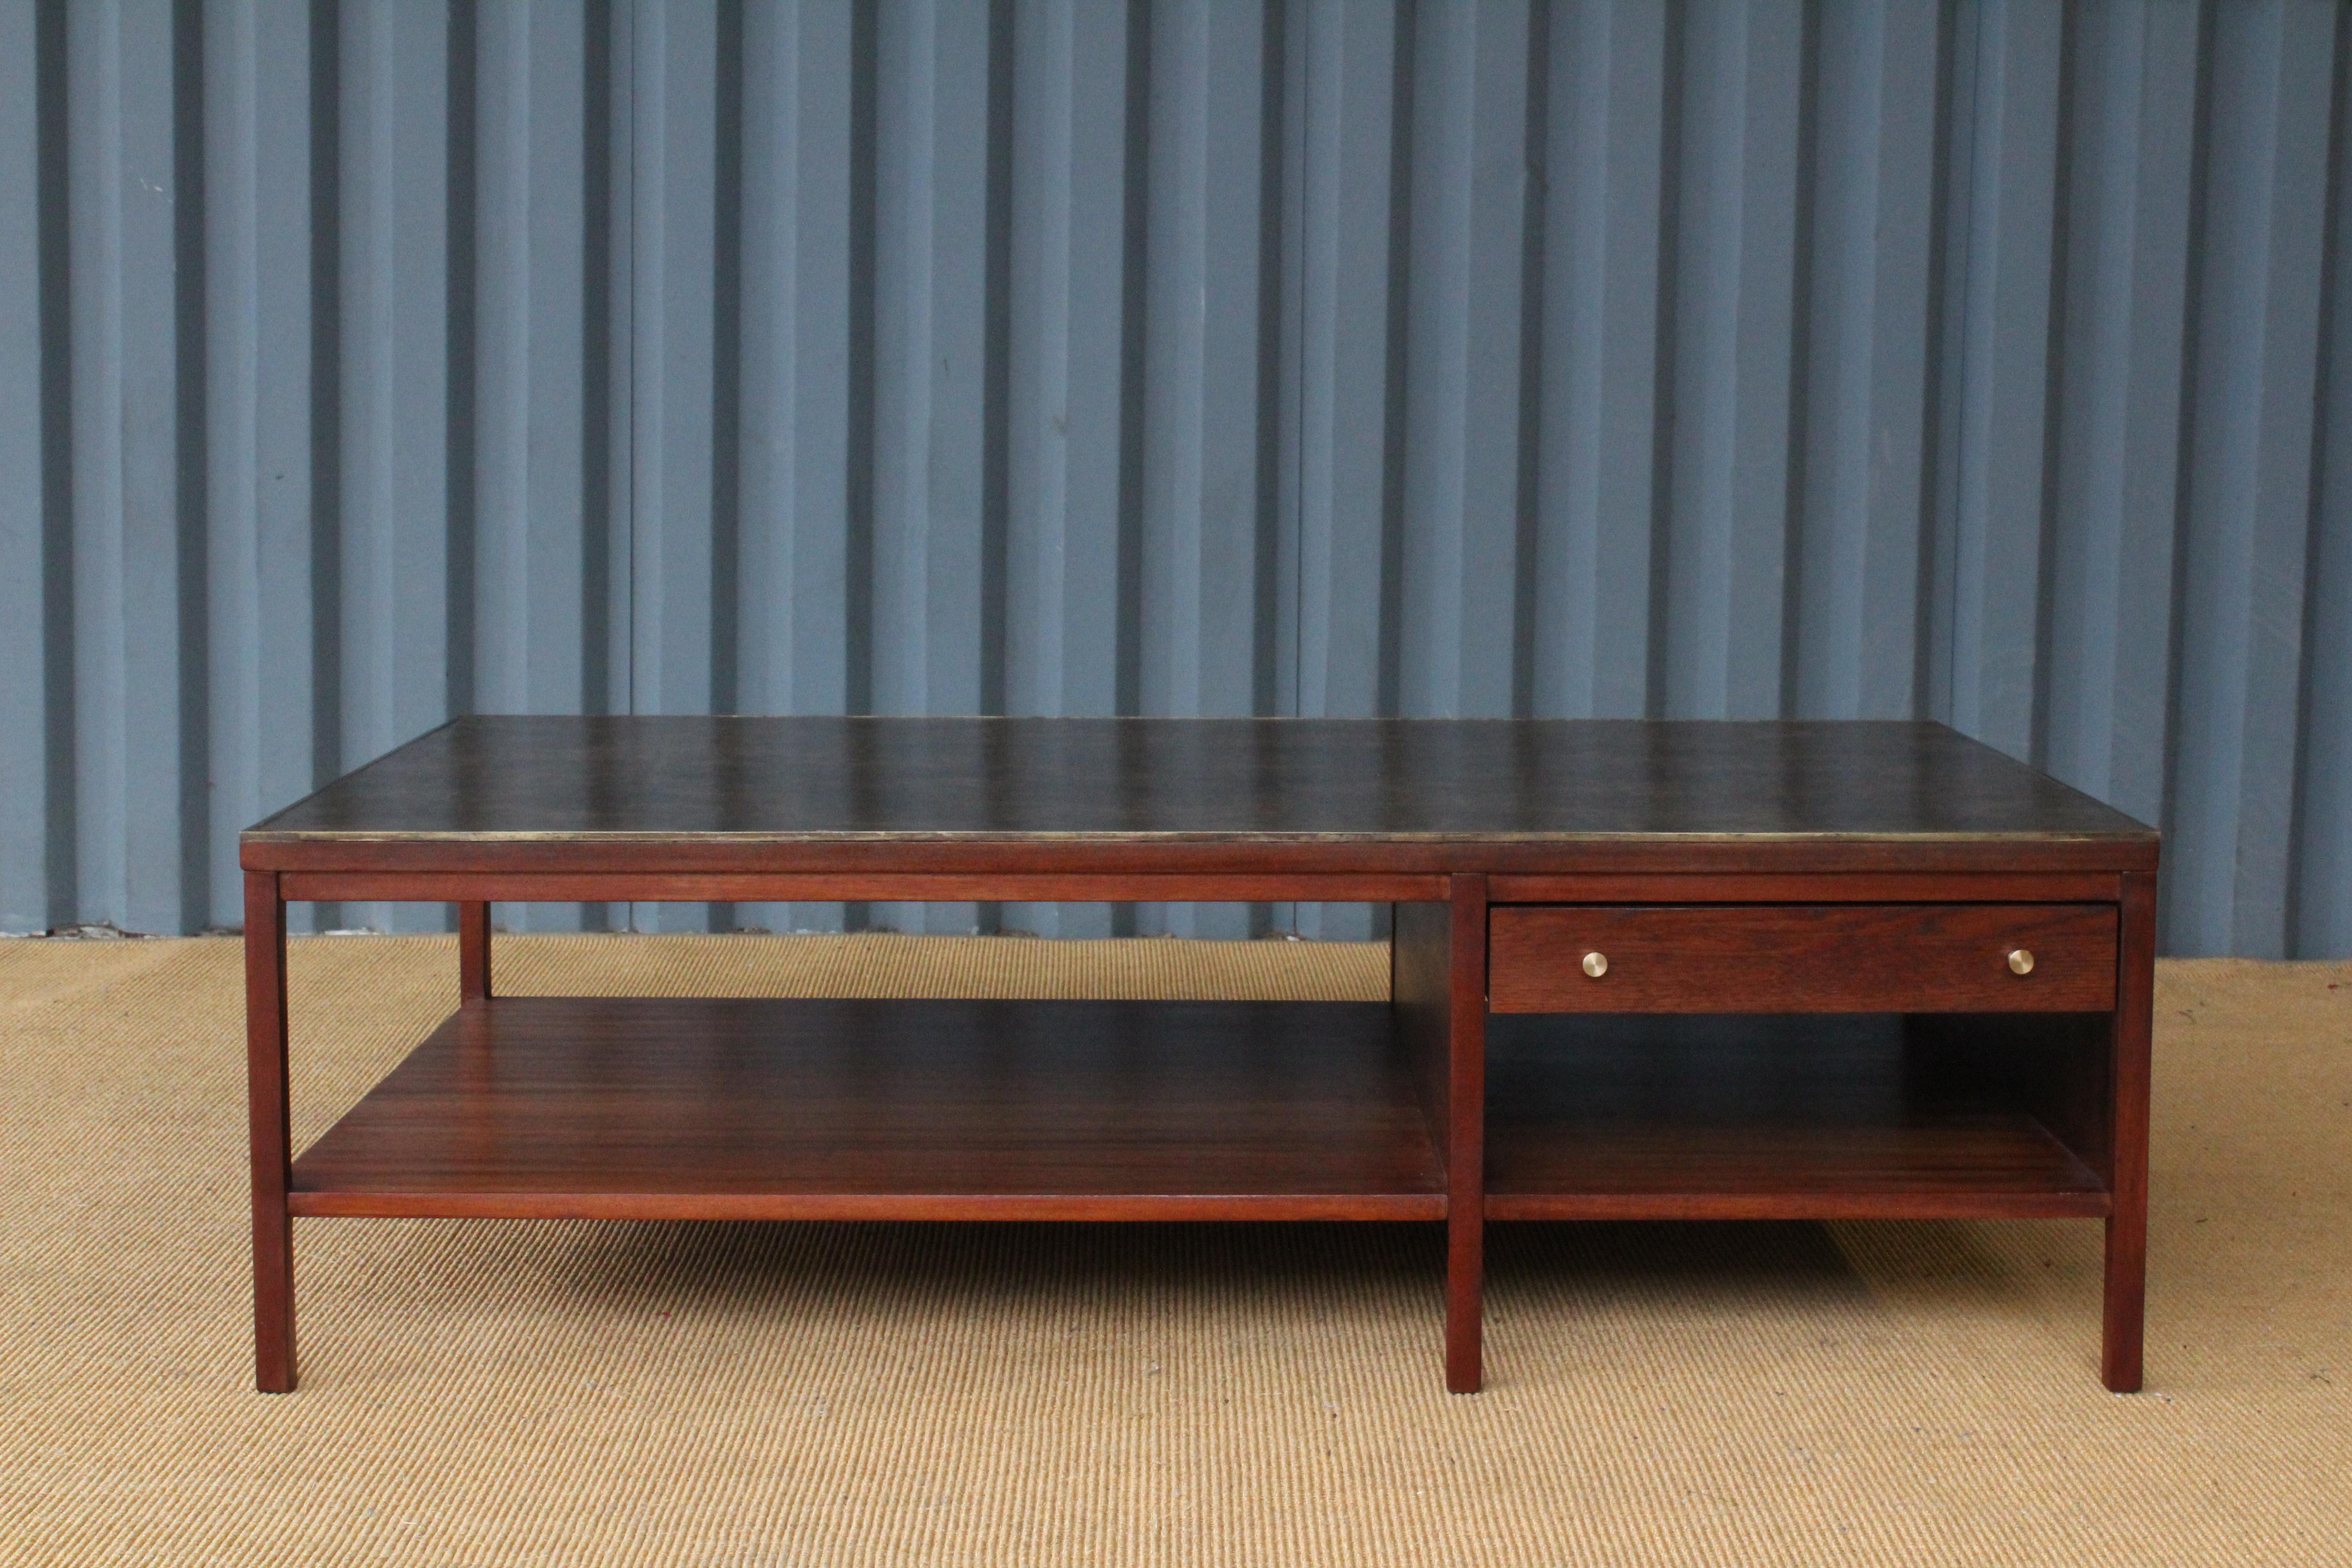 Mahogany coffee table designed by Paul McCobb for Calvin Furniture, 1950s. Features brass trim around the original leather top. Two drawers with brass pulls. Recently refinished. Leather surface shows a few minor signs of wear.
 